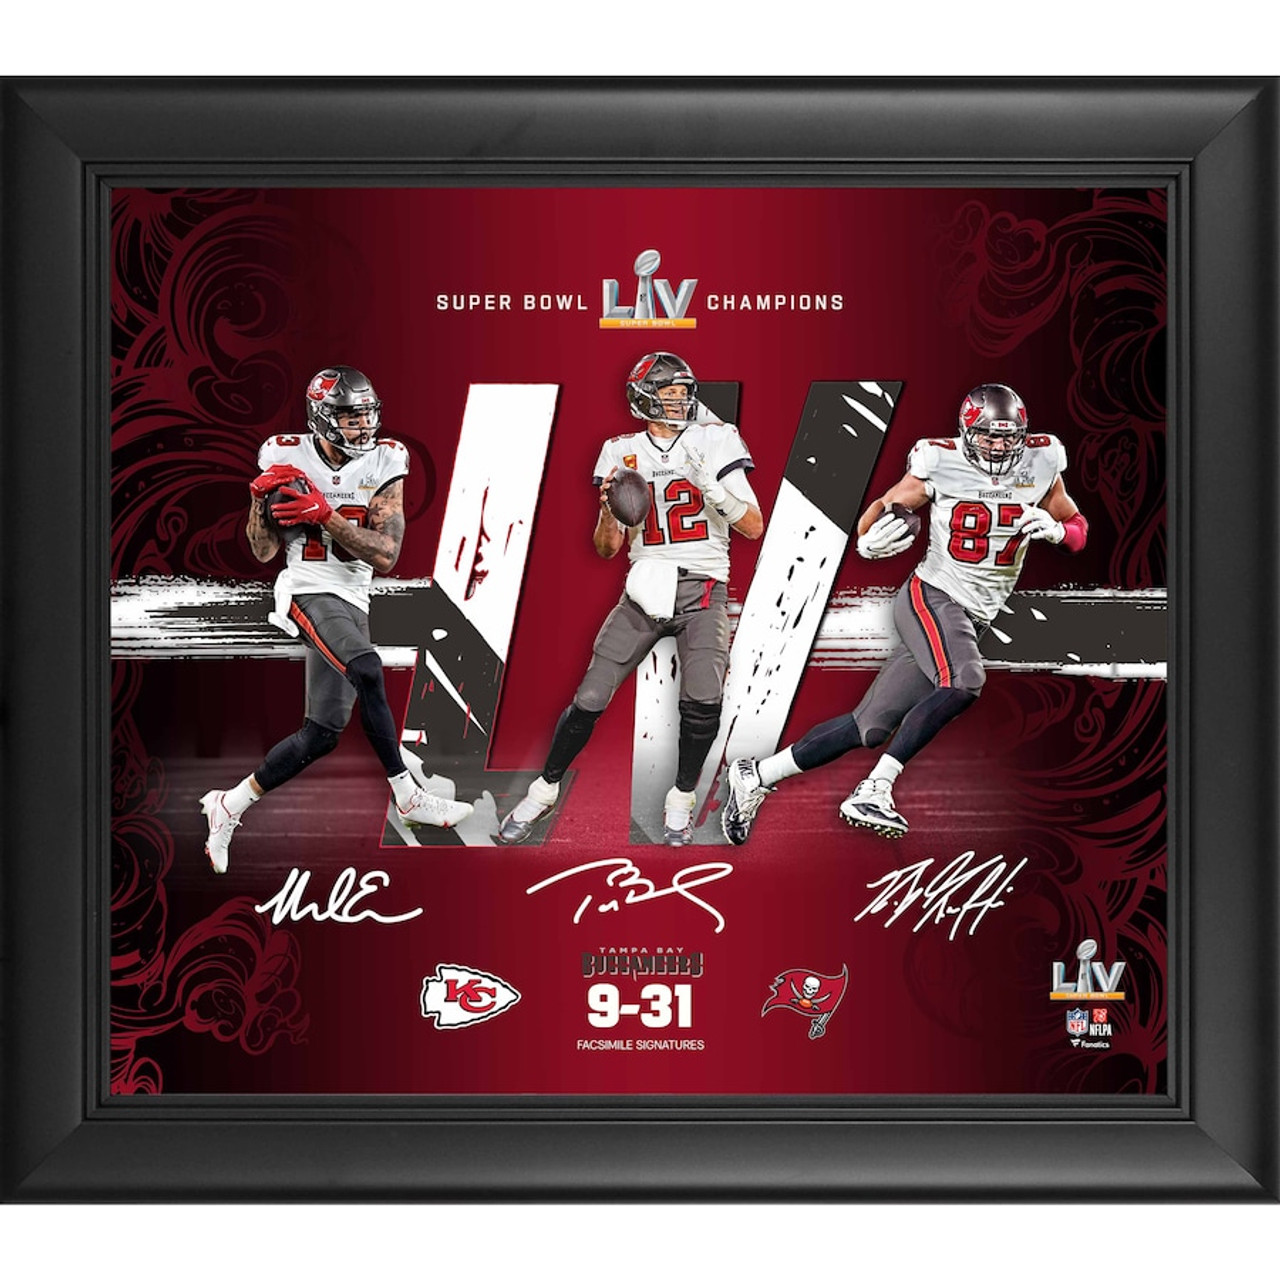 TAMPA BAY BUCCANEERS Super Bowl LV Champs 20 x 24 GU Football Collage LE  500 - Game Day Legends